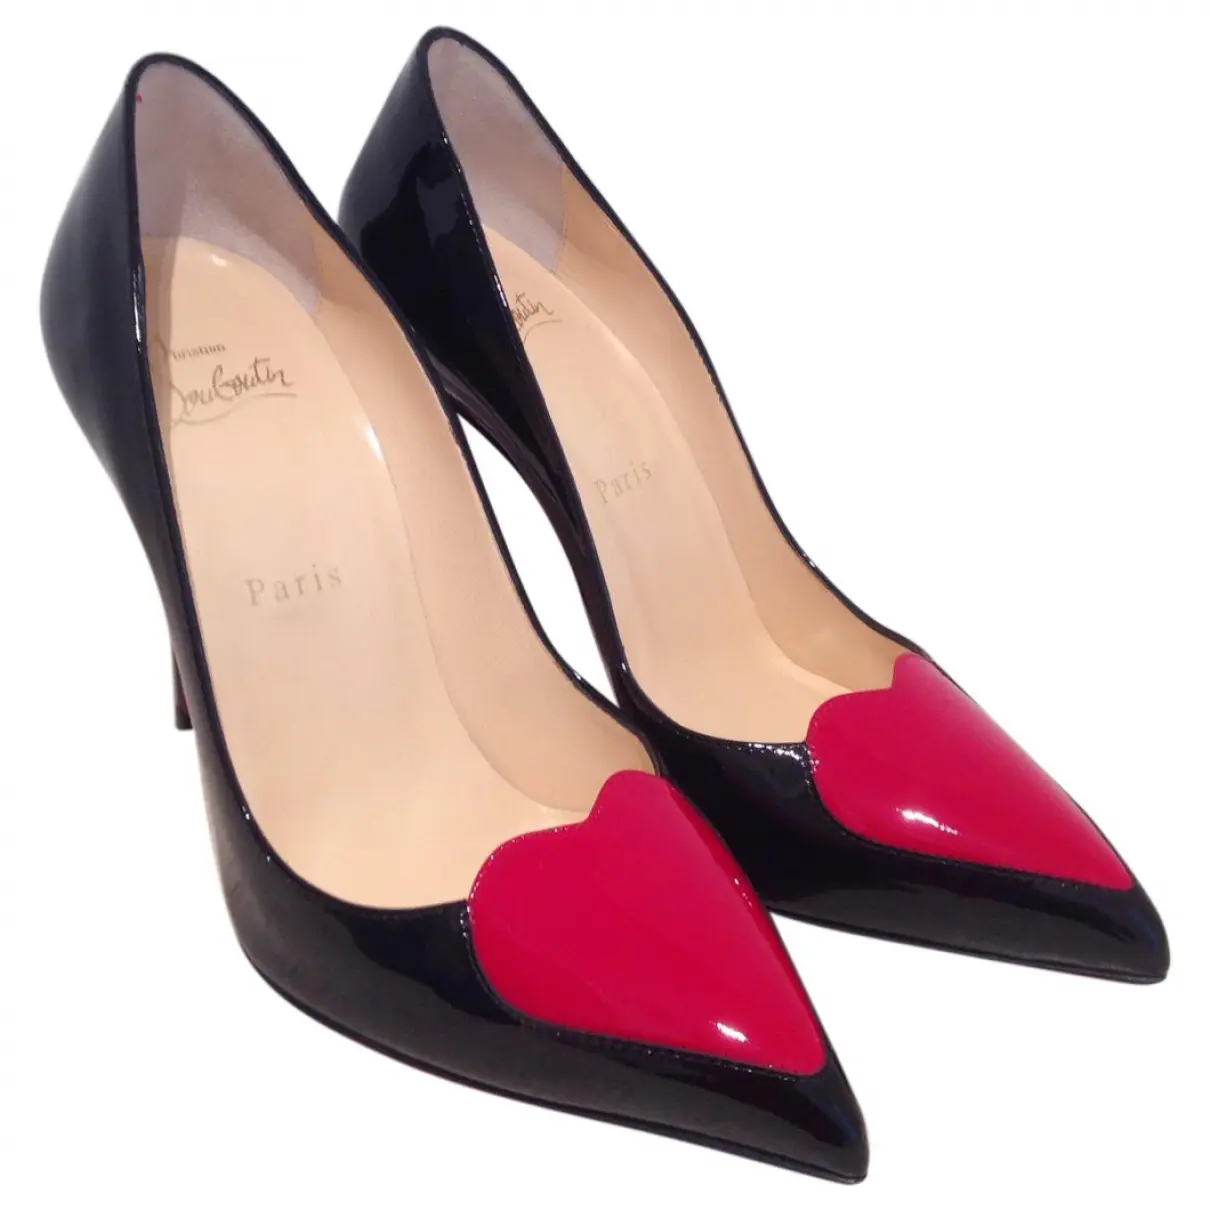 Limited edition Christian Louboutin patent leather heels\n\n Christian Louboutin